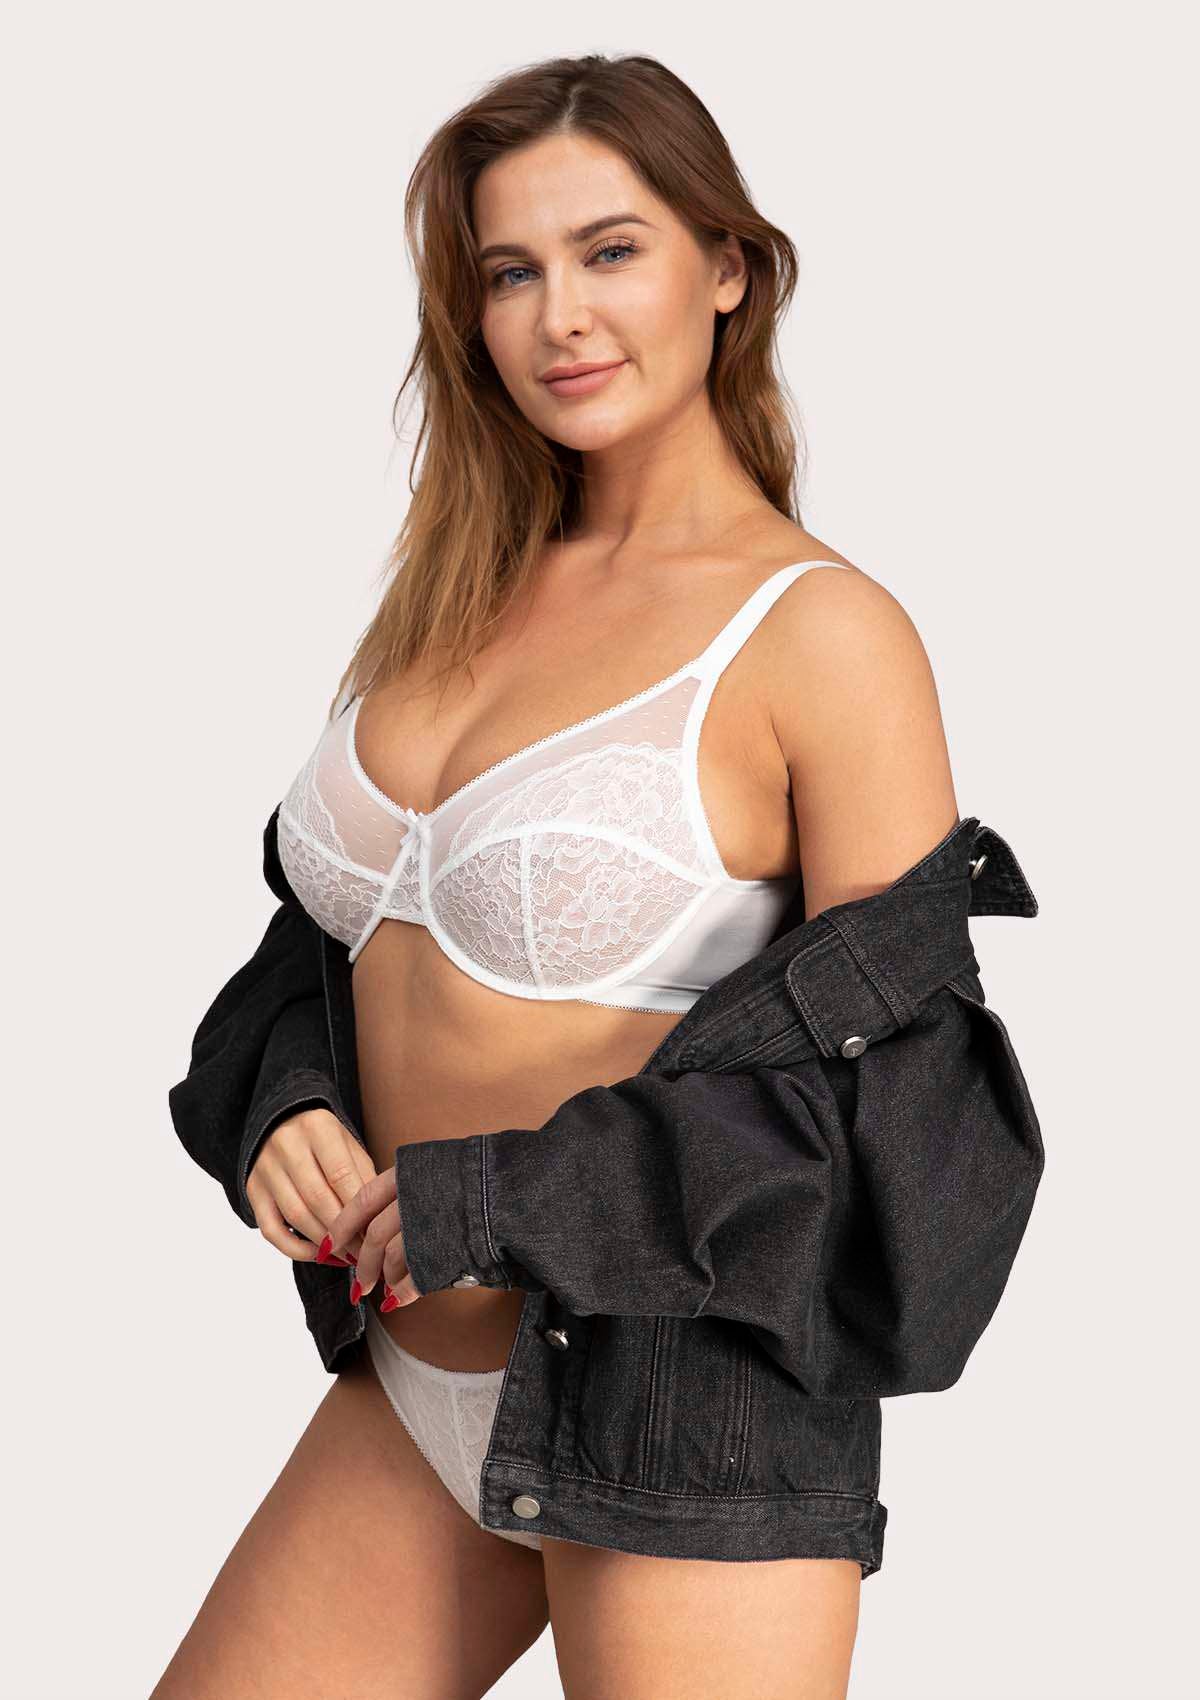 HSIA Enchante Lace Bra And Panties Set: Bra For Side And Back Fat - White / 36 / G